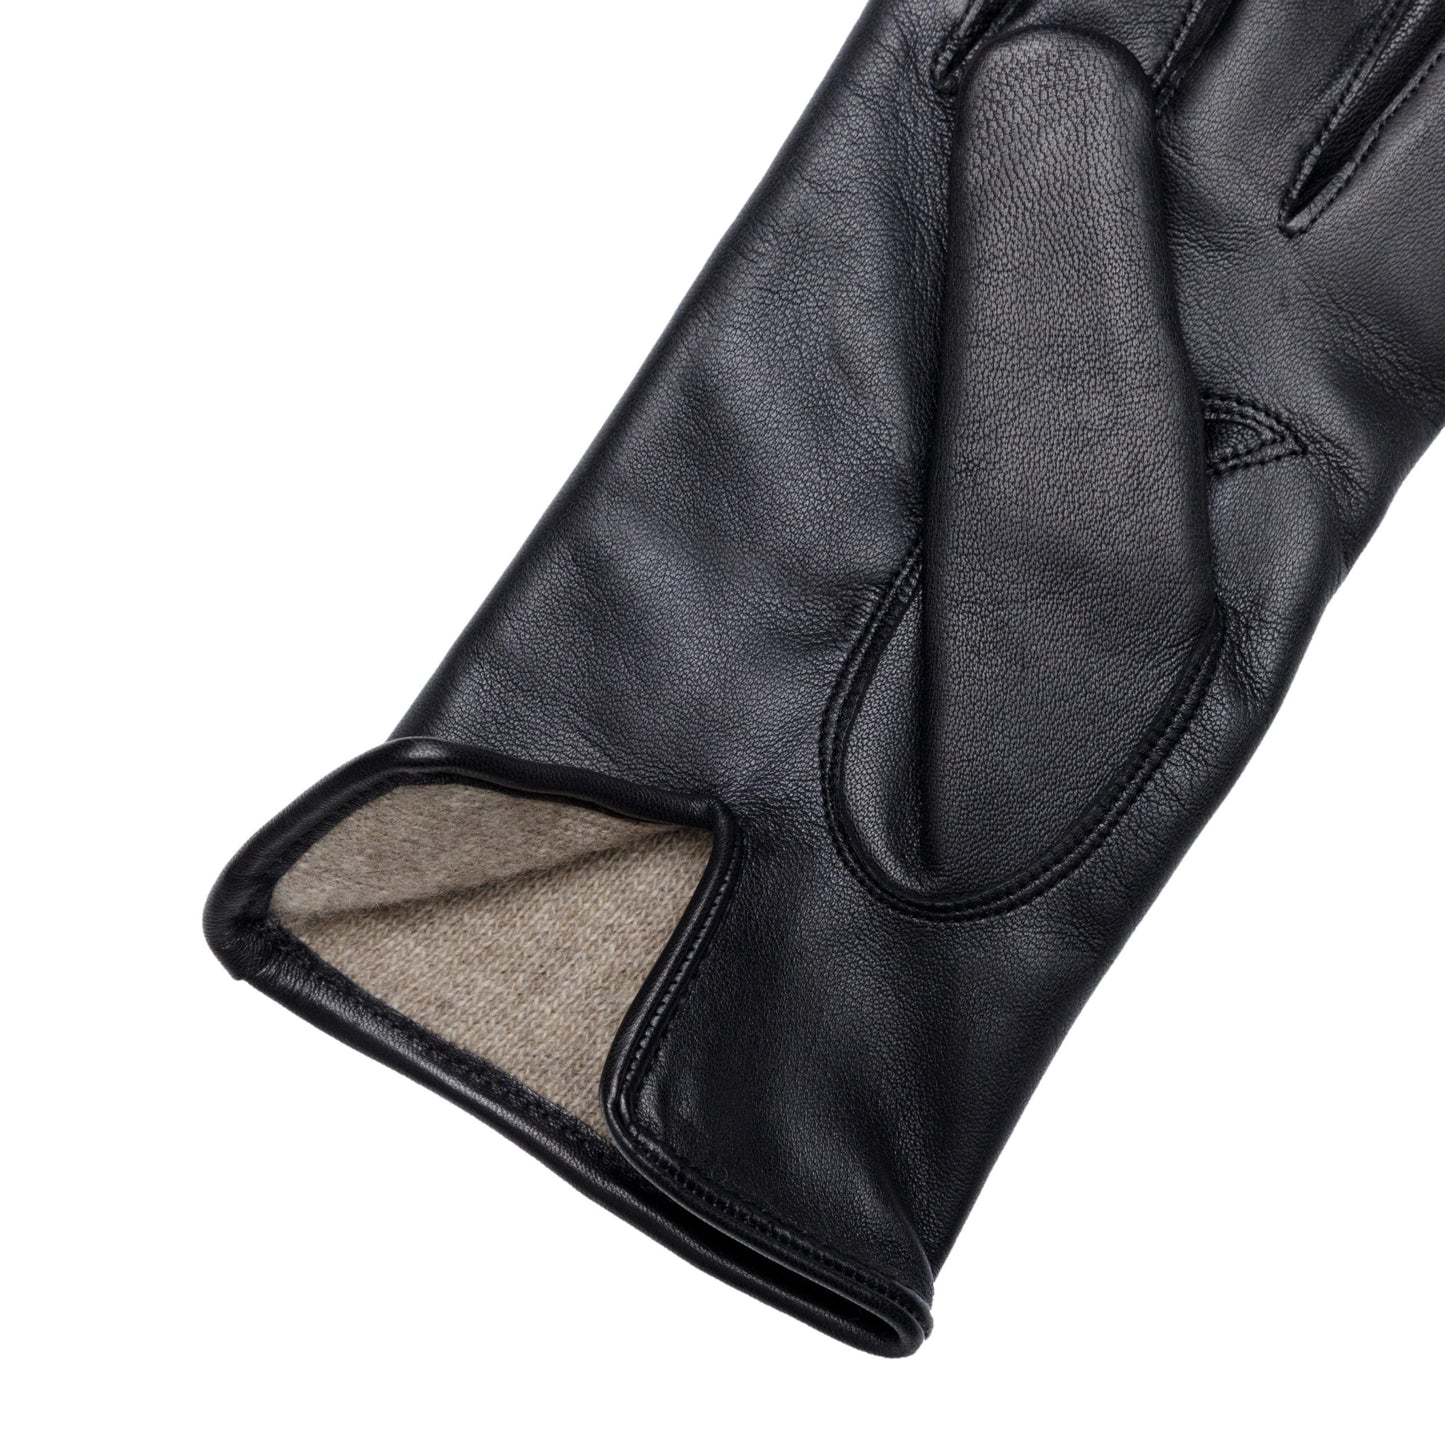 Men's black metal free nappa leather gloves with natural cashmere lining